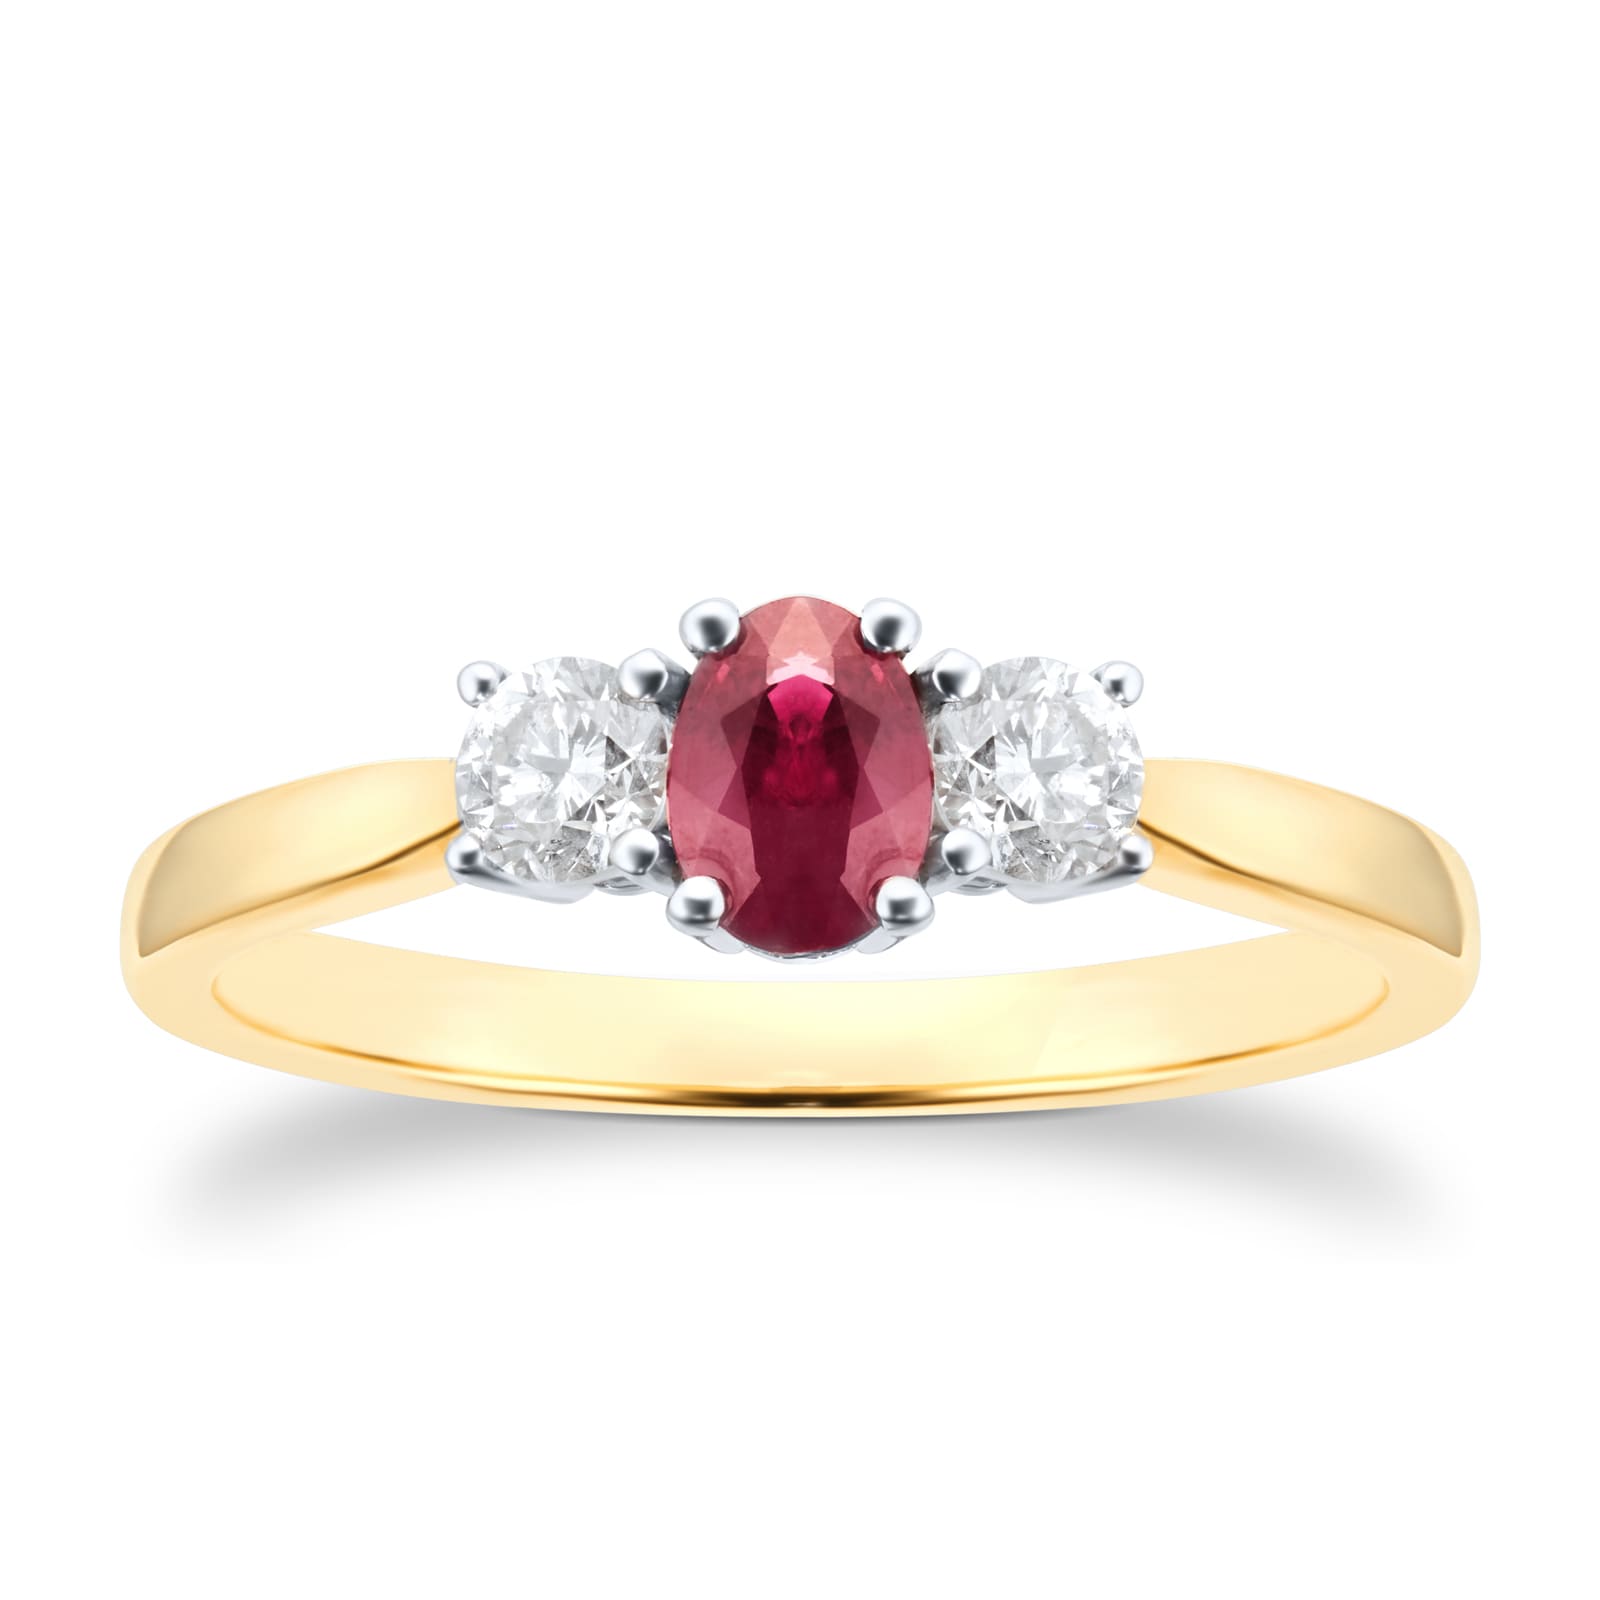 9ct Yellow and White Gold 3 Stone Ruby & Diamond Ring - Ring Size Q